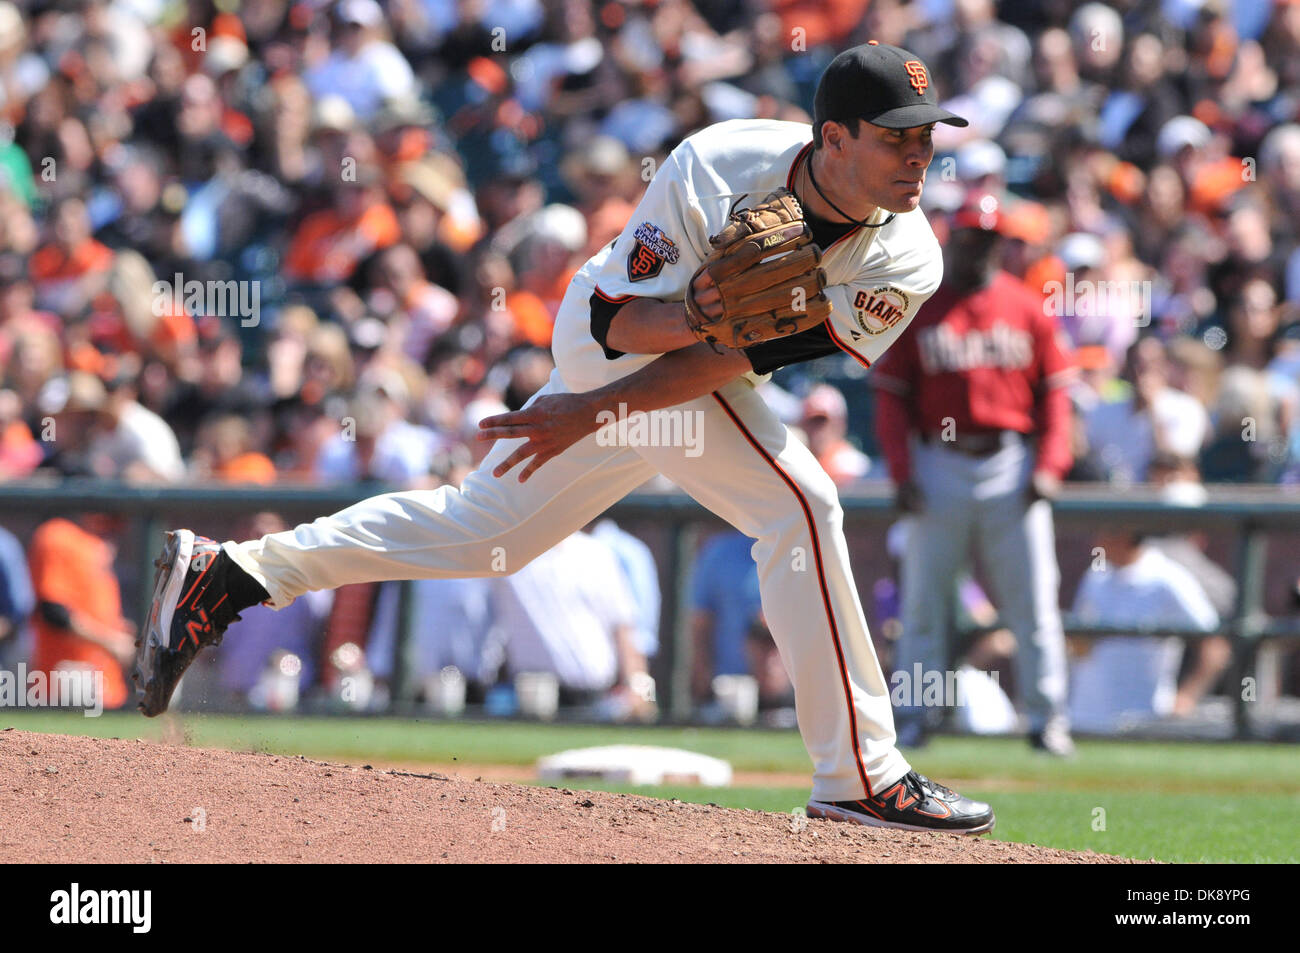 Aug. 3, 2011 - San Francisco, California, U.S. - San Francisco Giants relief pitcher JAVIER LOPEZ (49) pitches during Wednesday's game at At&t park.  The Giants beat the Diamondbacks 8-1. (Credit Image: © Scott Beley/Southcreek Global/ZUMAPRESS.com) Stock Photo